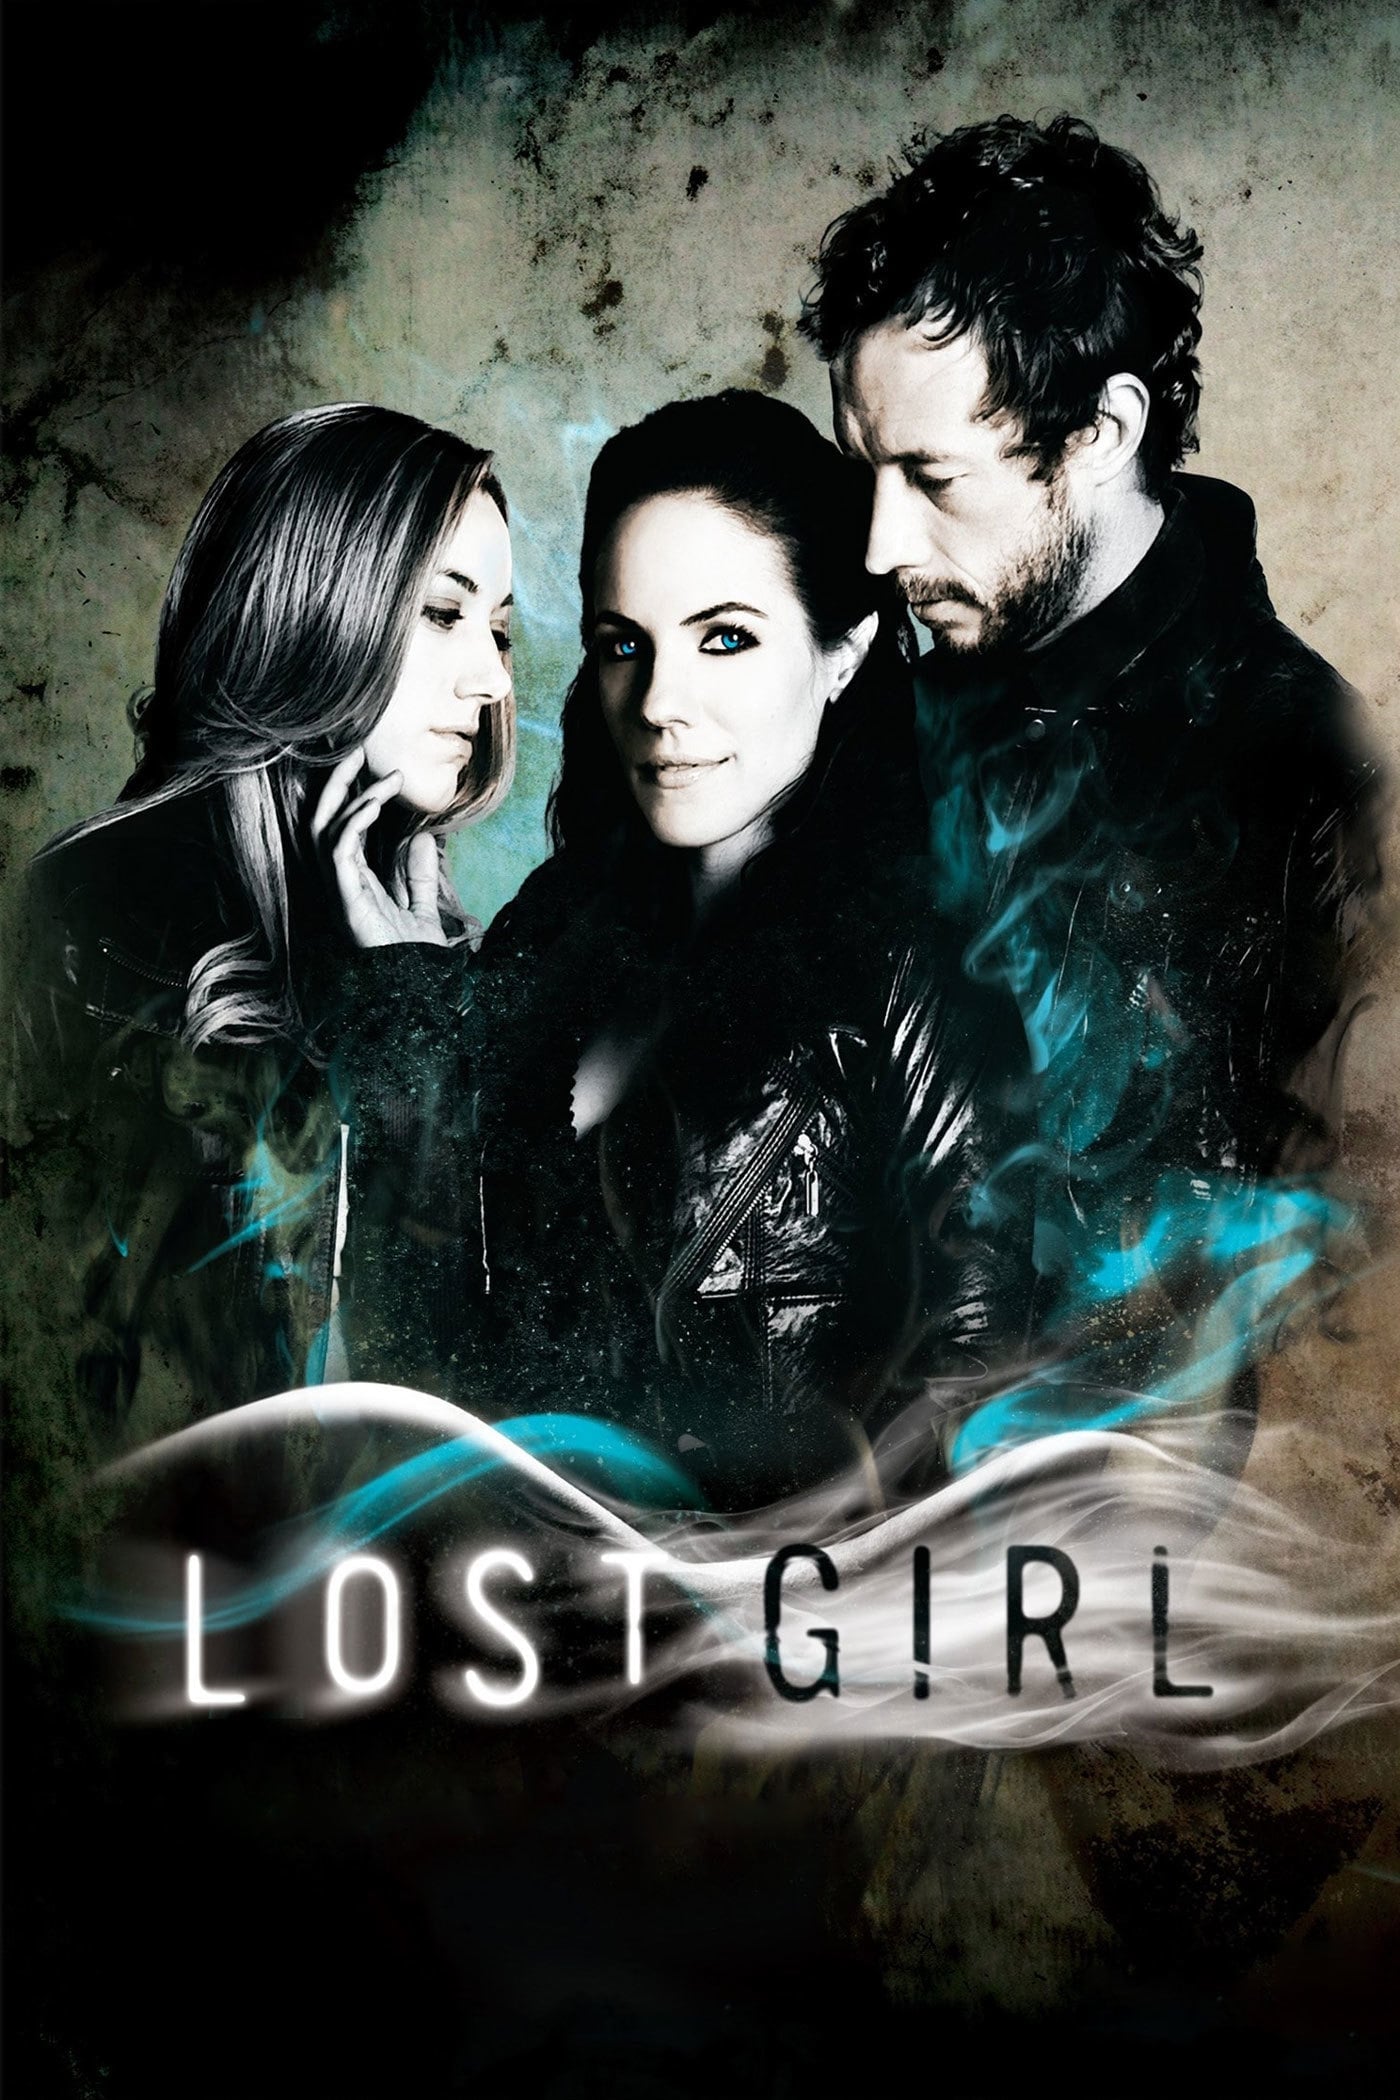 Lost Girl TV Shows About Werewolf